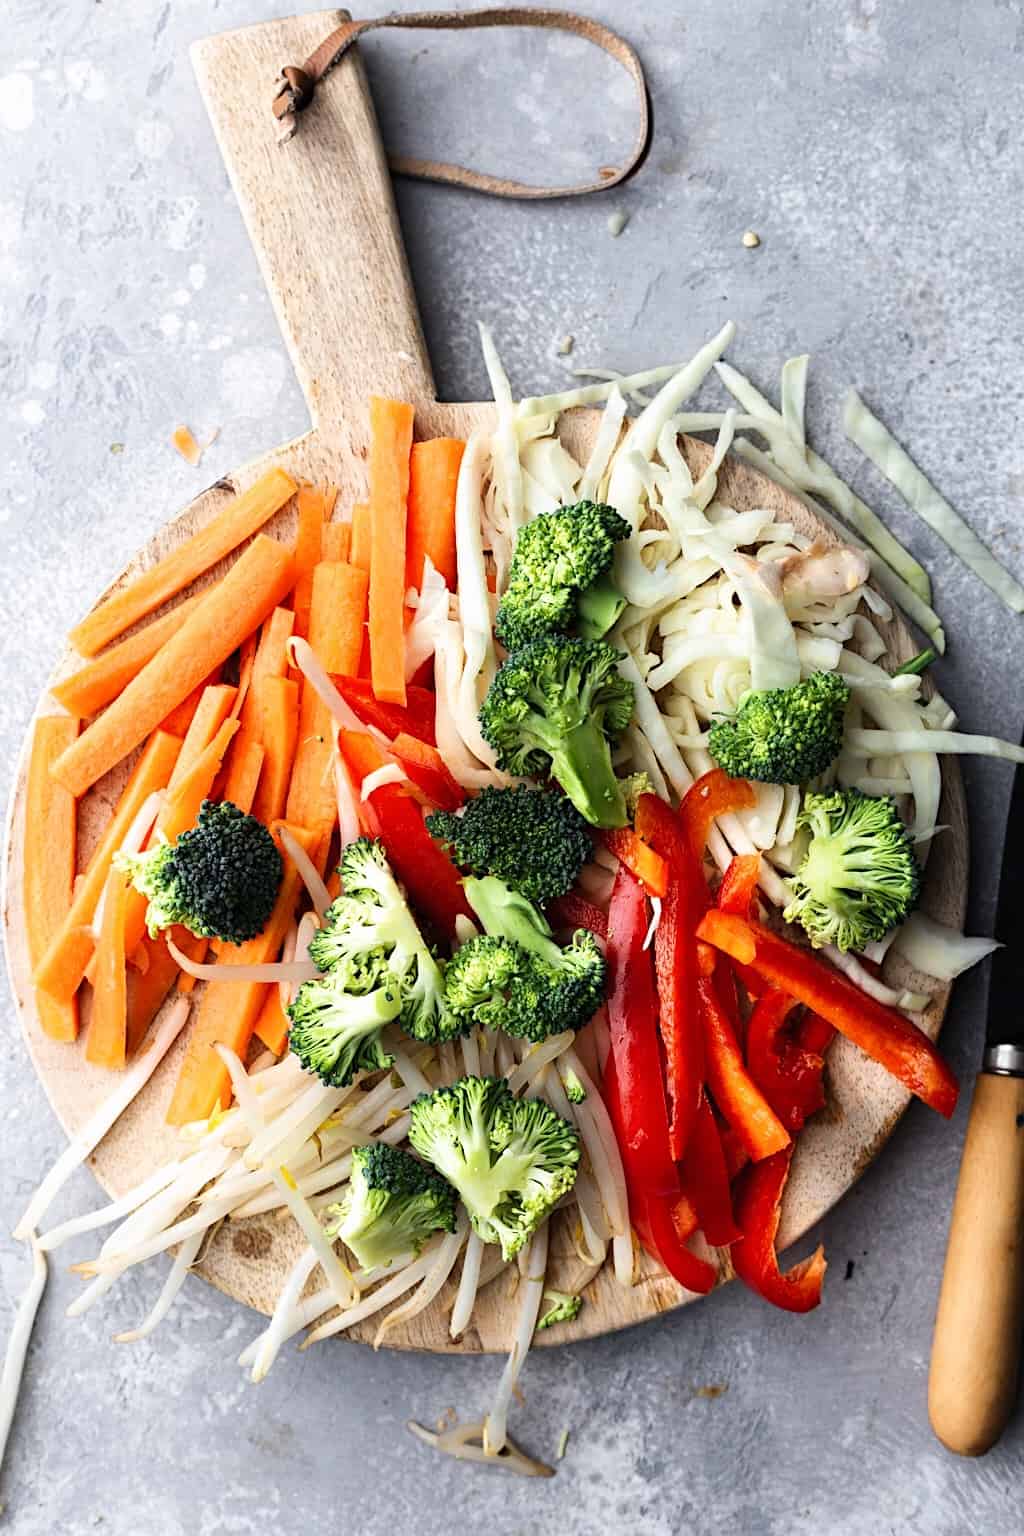 Chow Mein Vegetables